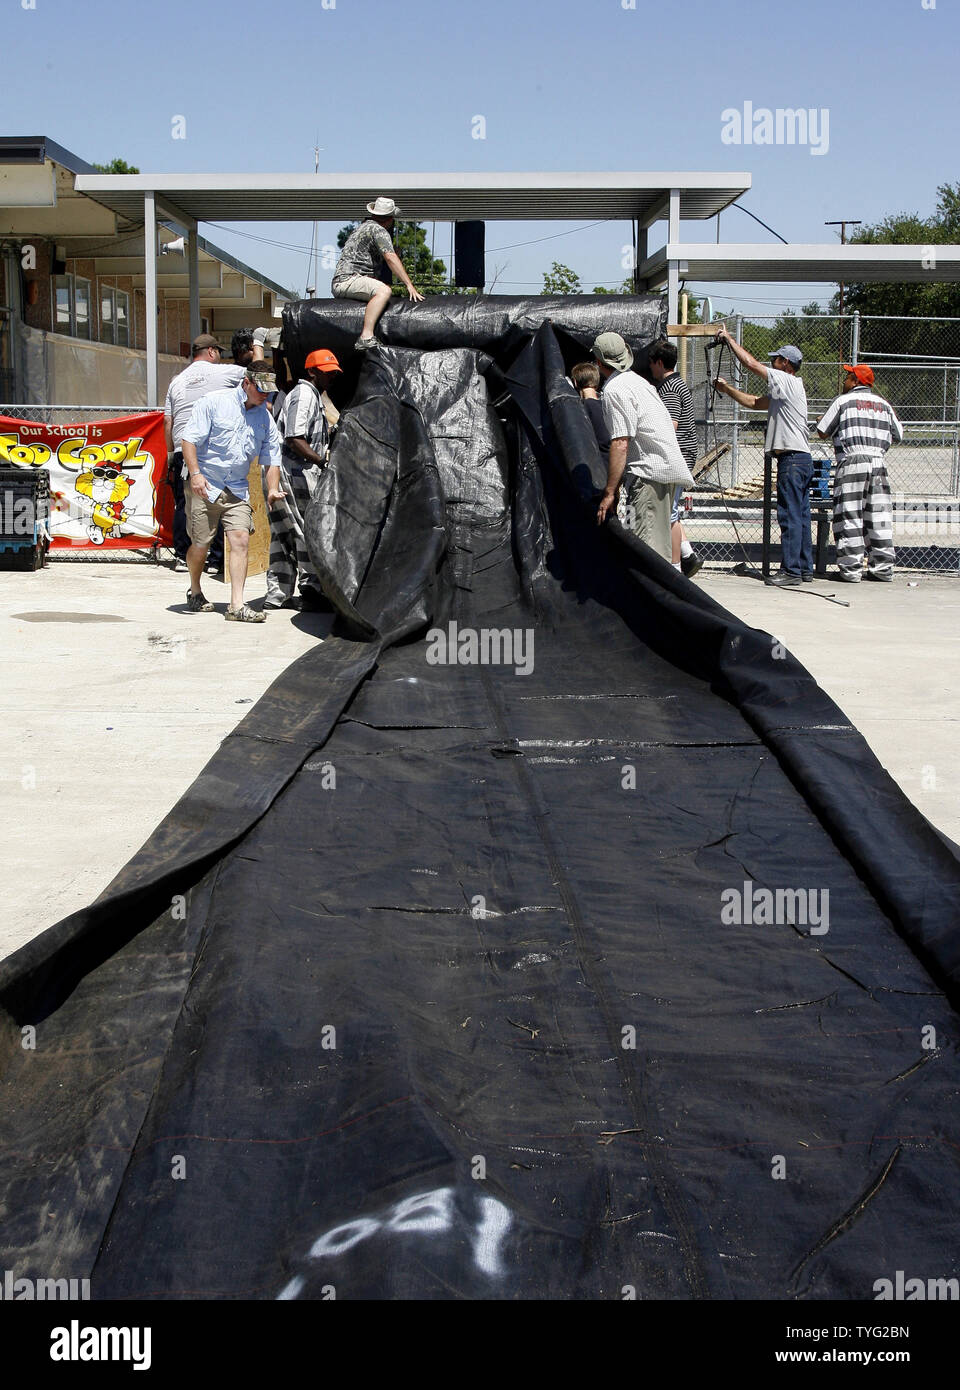 Prison inmates and volunteers unroll a section of 'aqua dam,' a rubber bladder that is filled with water to create a temporary dam, in Stephensville, Louisiana, May 14, 2011. Residents of St. Mary Parish were preparing for high water after the U.S. Army Corps of Engineers opened the Morganza Floodway to divert water from the cresting Mississippi River away from downriver cities including Baton Rouge and New Orleans.  UPI/A.J. Sisco. Stock Photo